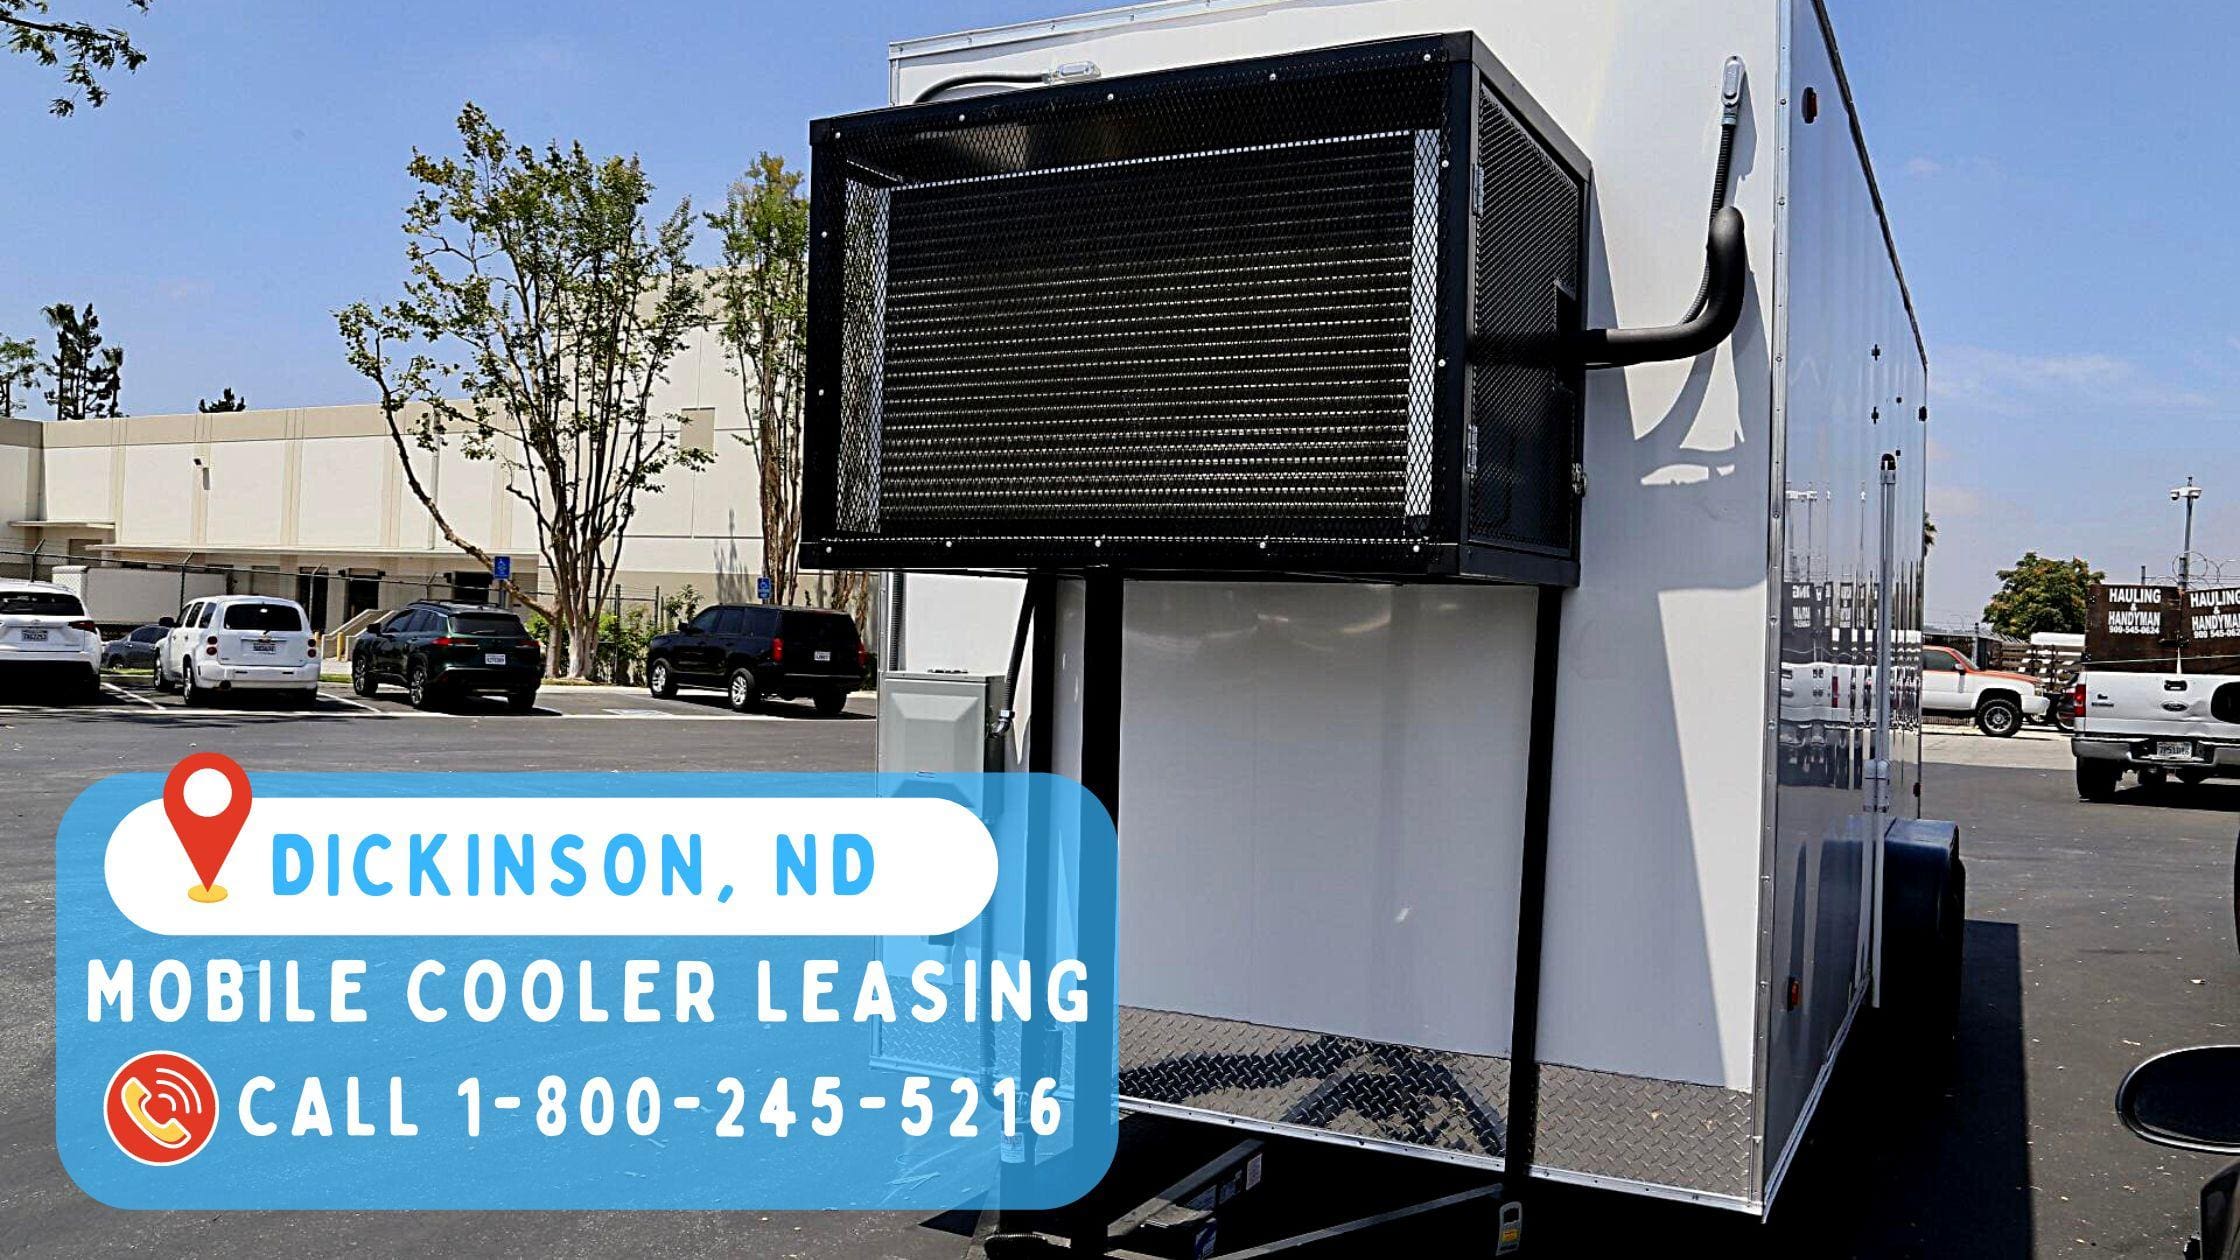 https://www.icefoxequipment.com/wp-content/uploads/2023/01/Mobile-Cooler-Leasing-in-Dickinson-1.jpg